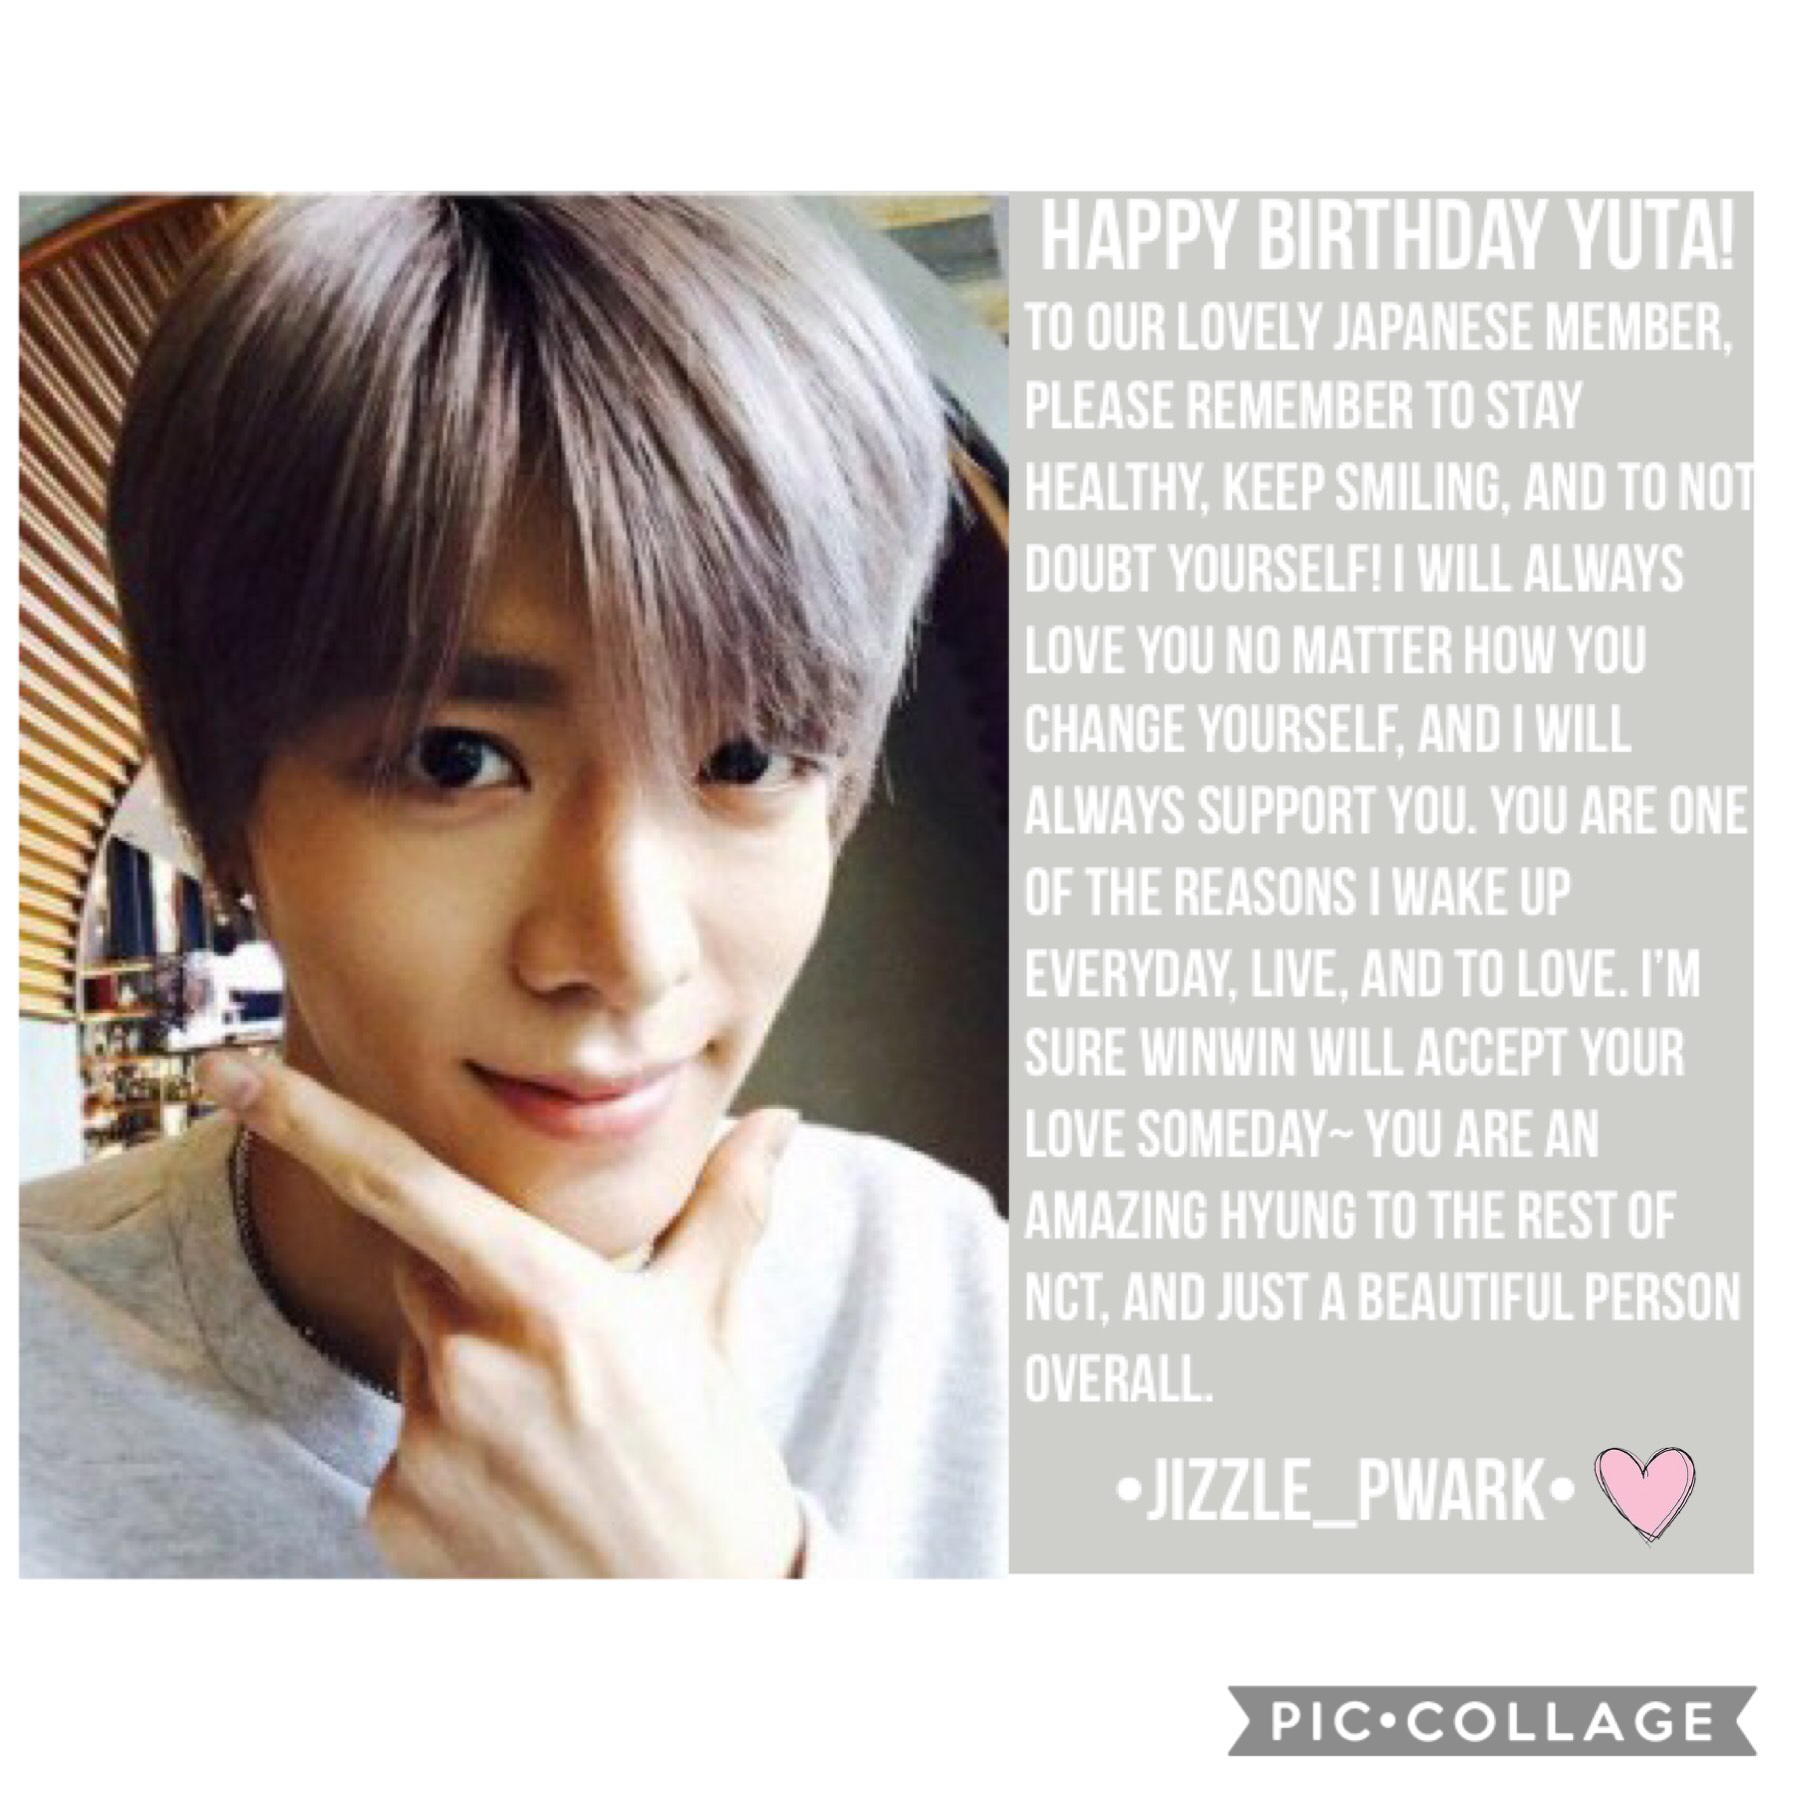 •🎂•
Happy Birthday to our beautiful Japanese member!